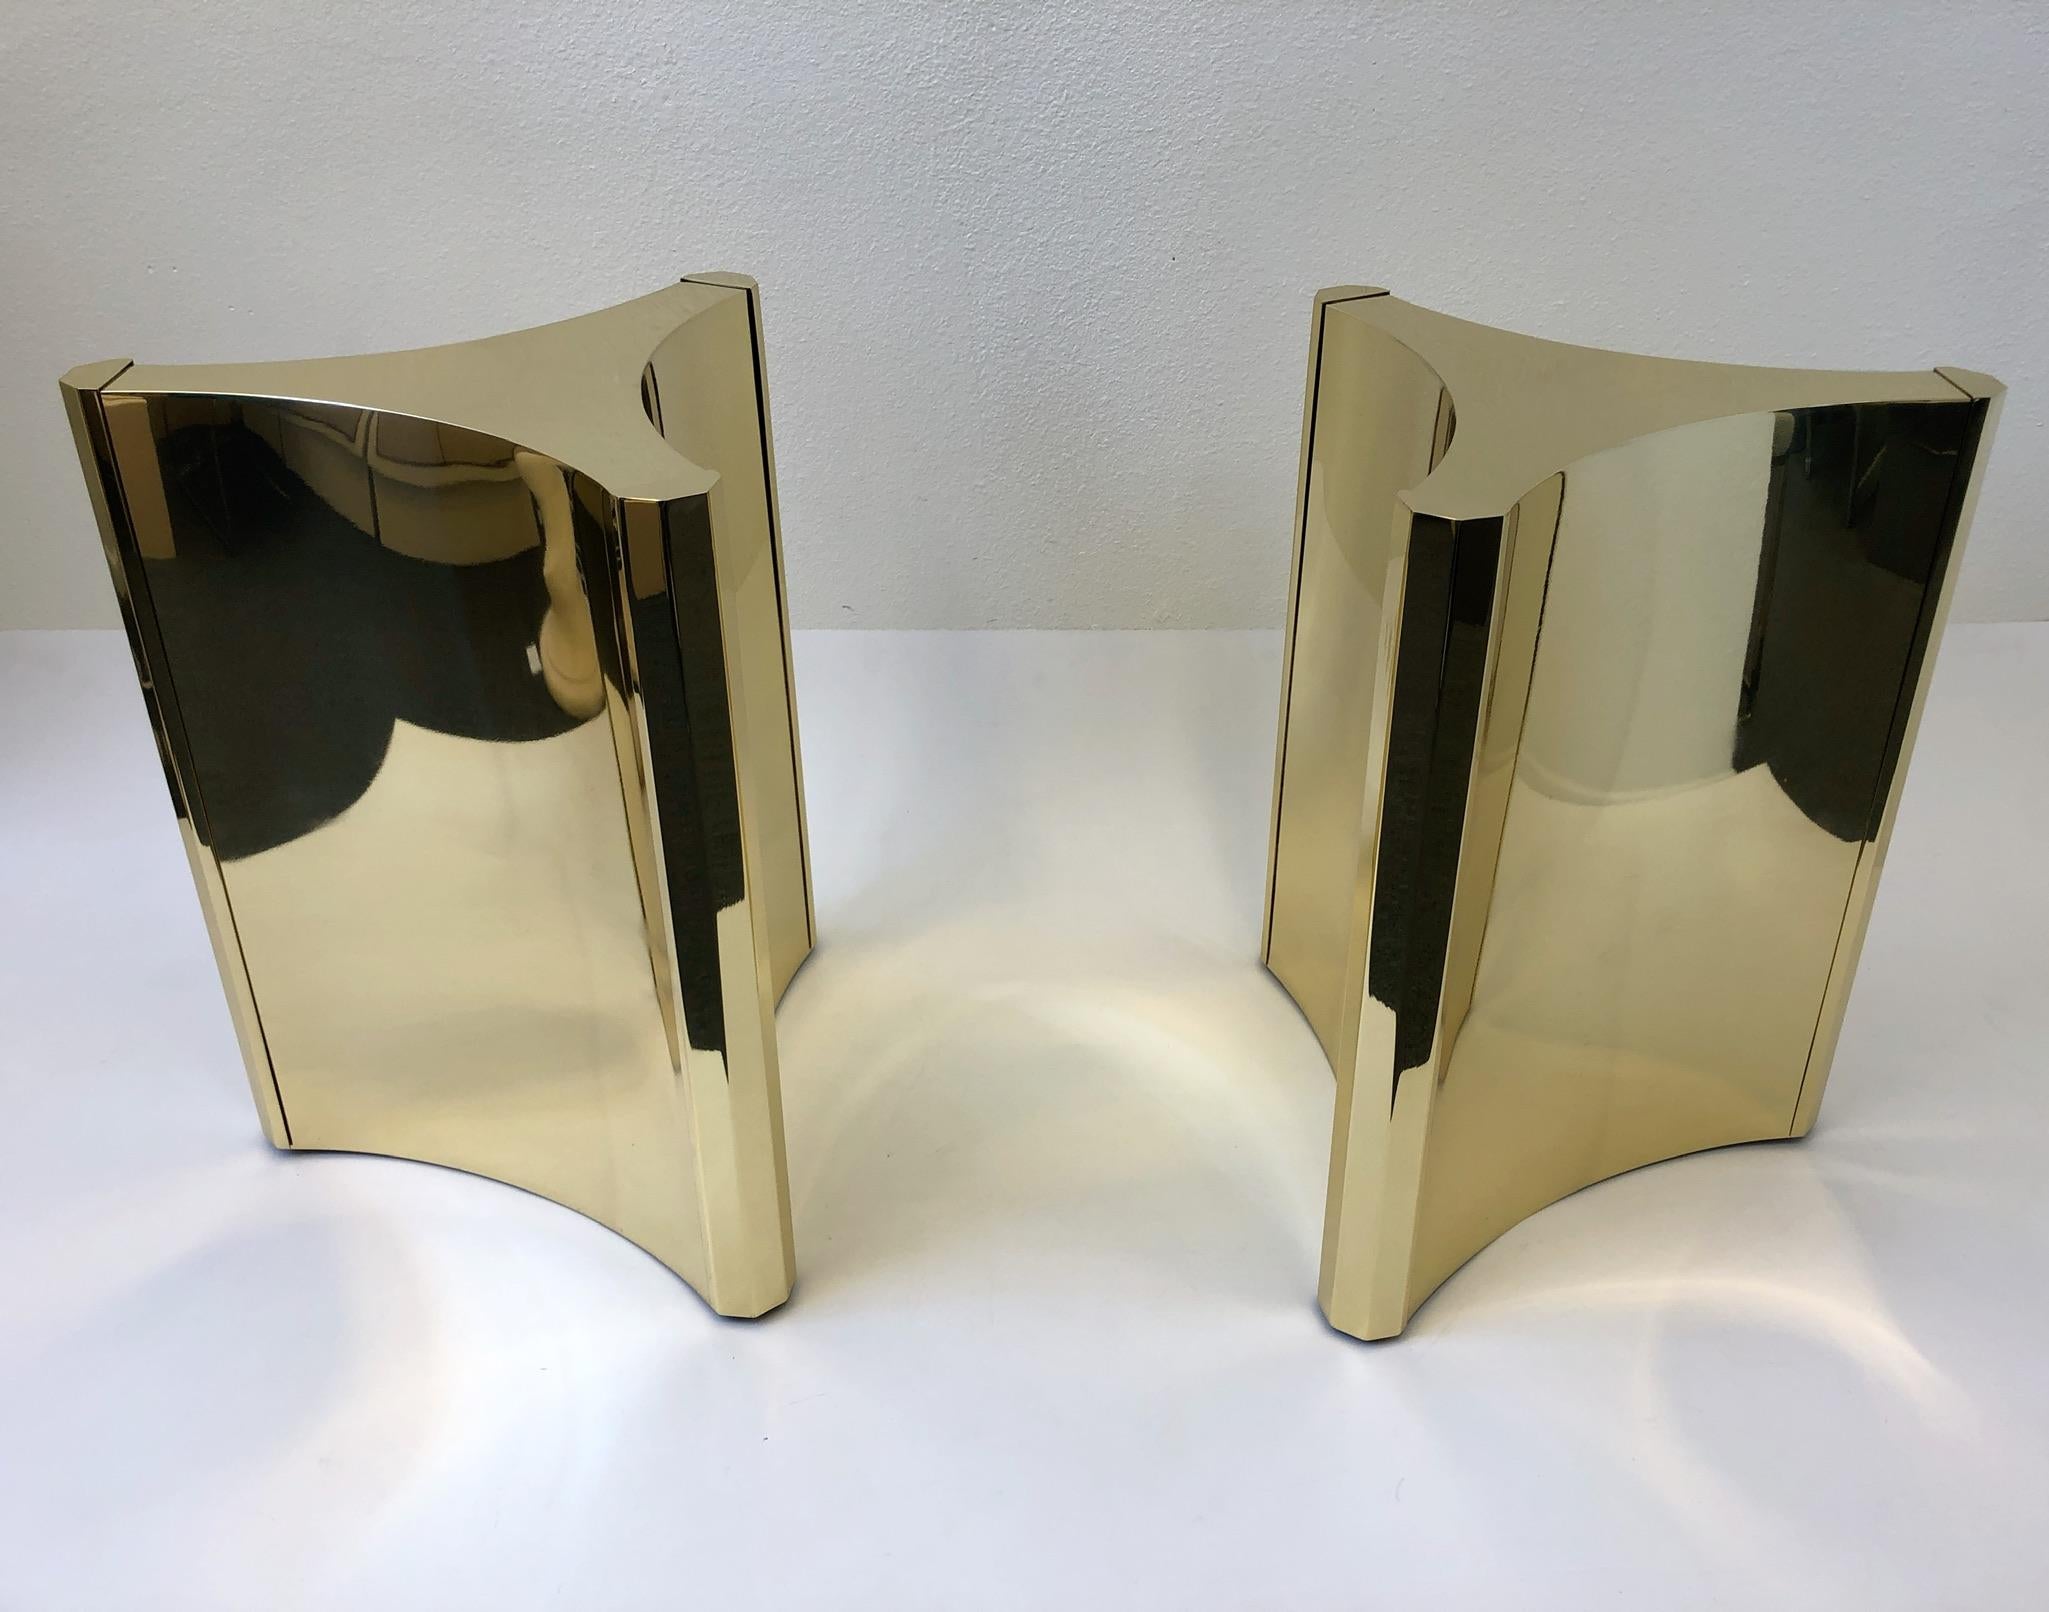 Modern Pair of Polished Brass Dining Table Bases by Mastercraft